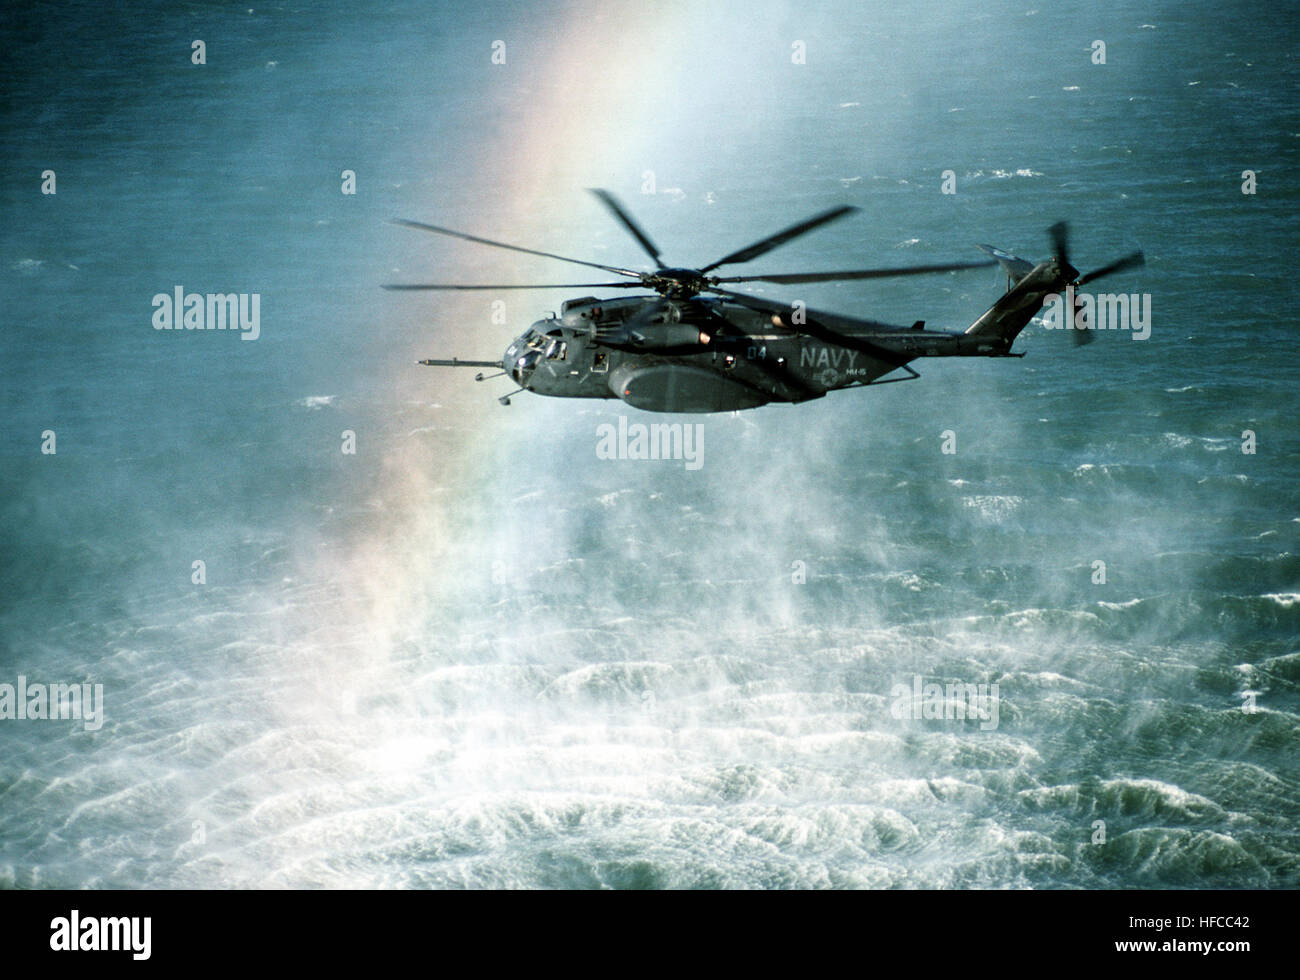 A rainbow is formed in the mist rising from the ocean as a Helicopter Mine Countermeasures Squadron 15 (HM-15) MH-53E Sea Dragon helicopter conducts mine countermeasures operations near Naval Air Station, Alameda, Calif. MH-53E Sea Dragon rainbow Stock Photo